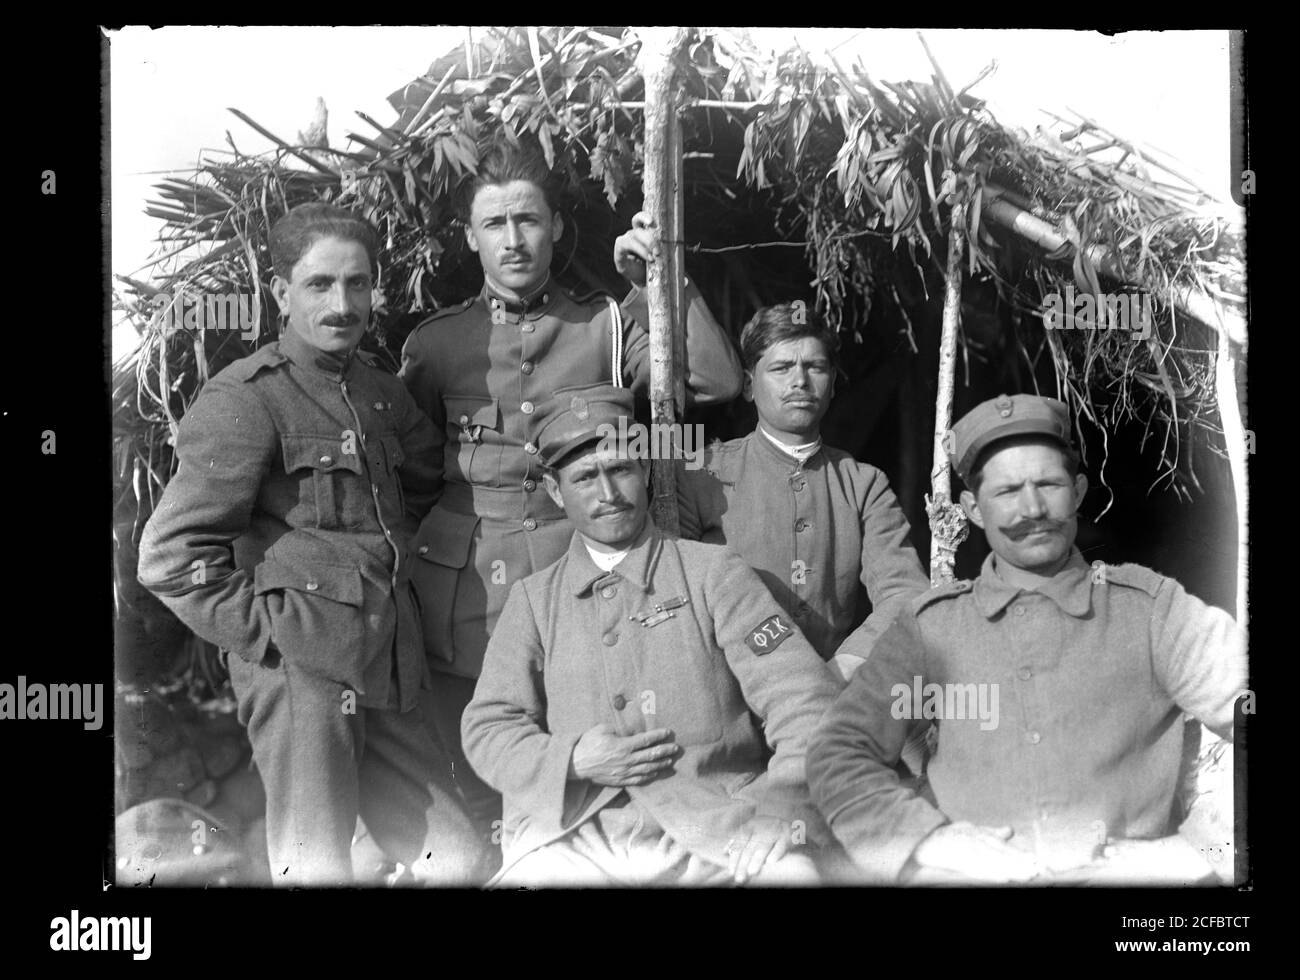 Group of greek soldiers in Turkey near Izmir / Smyrna with their camouflaged shelter at around 1910. One of the men is wearing a Phi Sigma Kappa emblem on his uniform sleeve. Photograph on dry glass plate from the Herry W. Schaefer collection, around 1910. Stock Photo